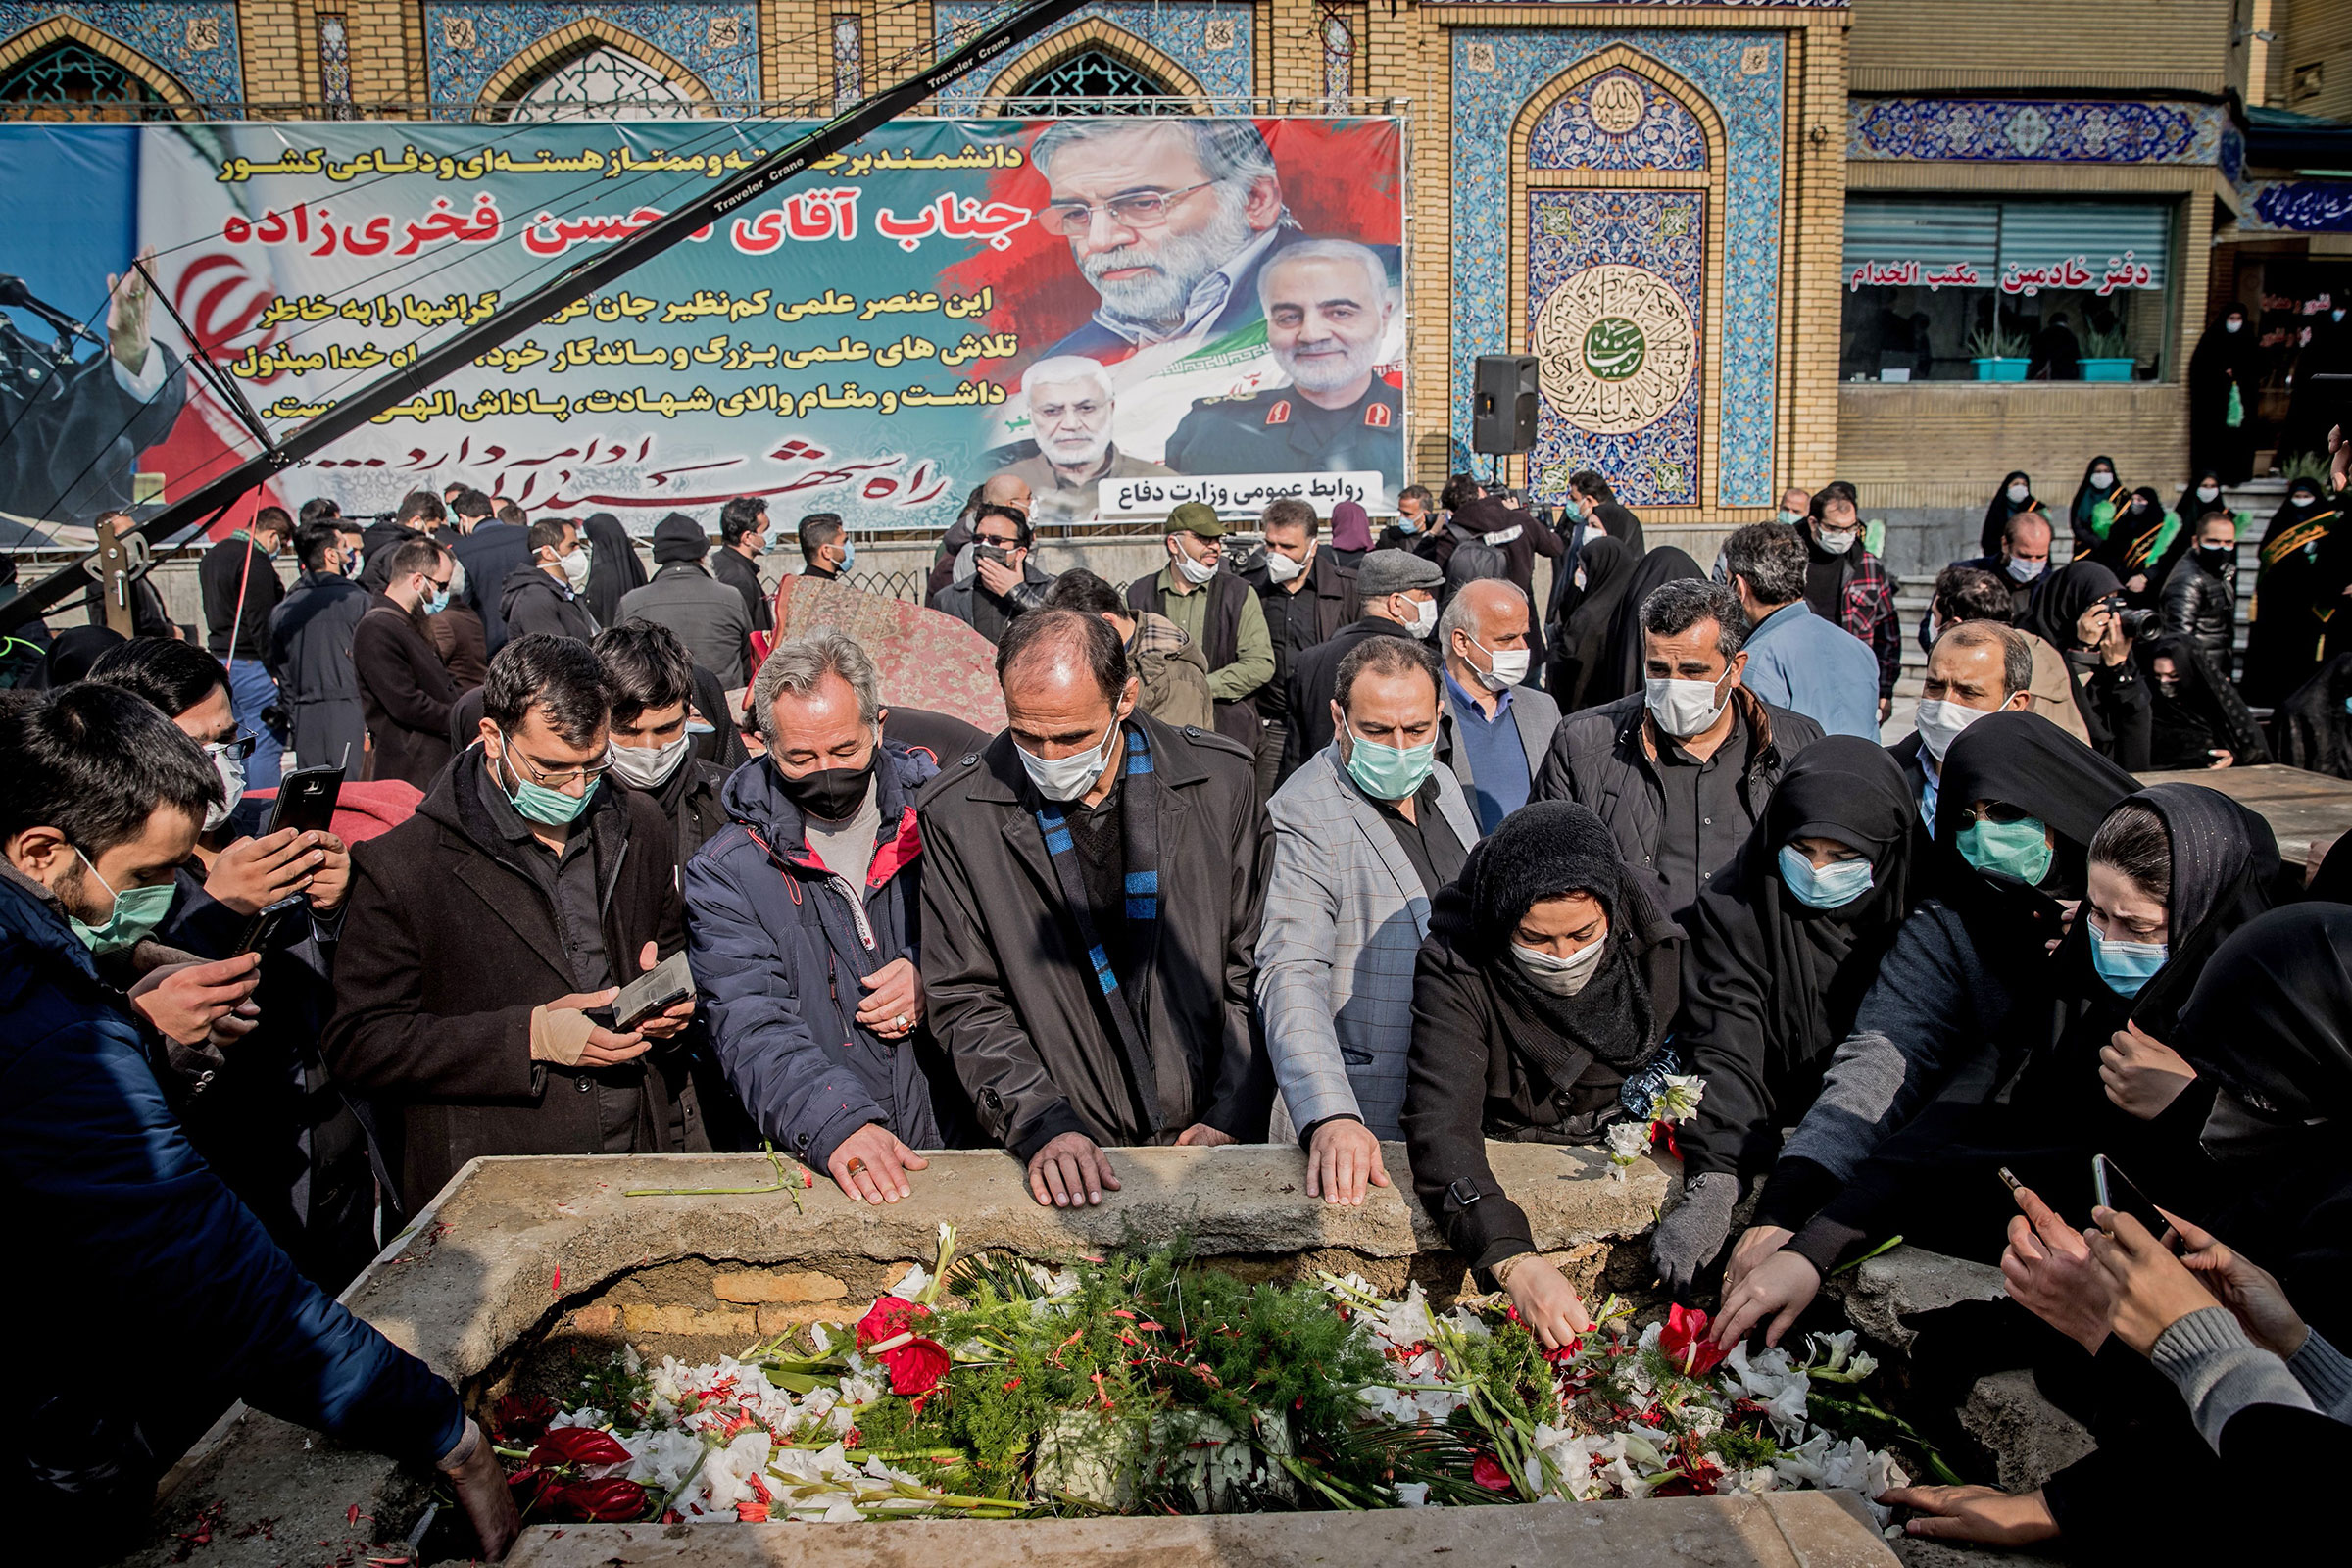 Iranian mourners attend the burial ceremony of slain nuclear scientist Mohsen Fakhrizadeh at Imamzadeh Saleh shrine in northern Tehran, on Nov. 30, 2020. (Hamed Malekpour—Tasnim News/AFP/Getty Images)